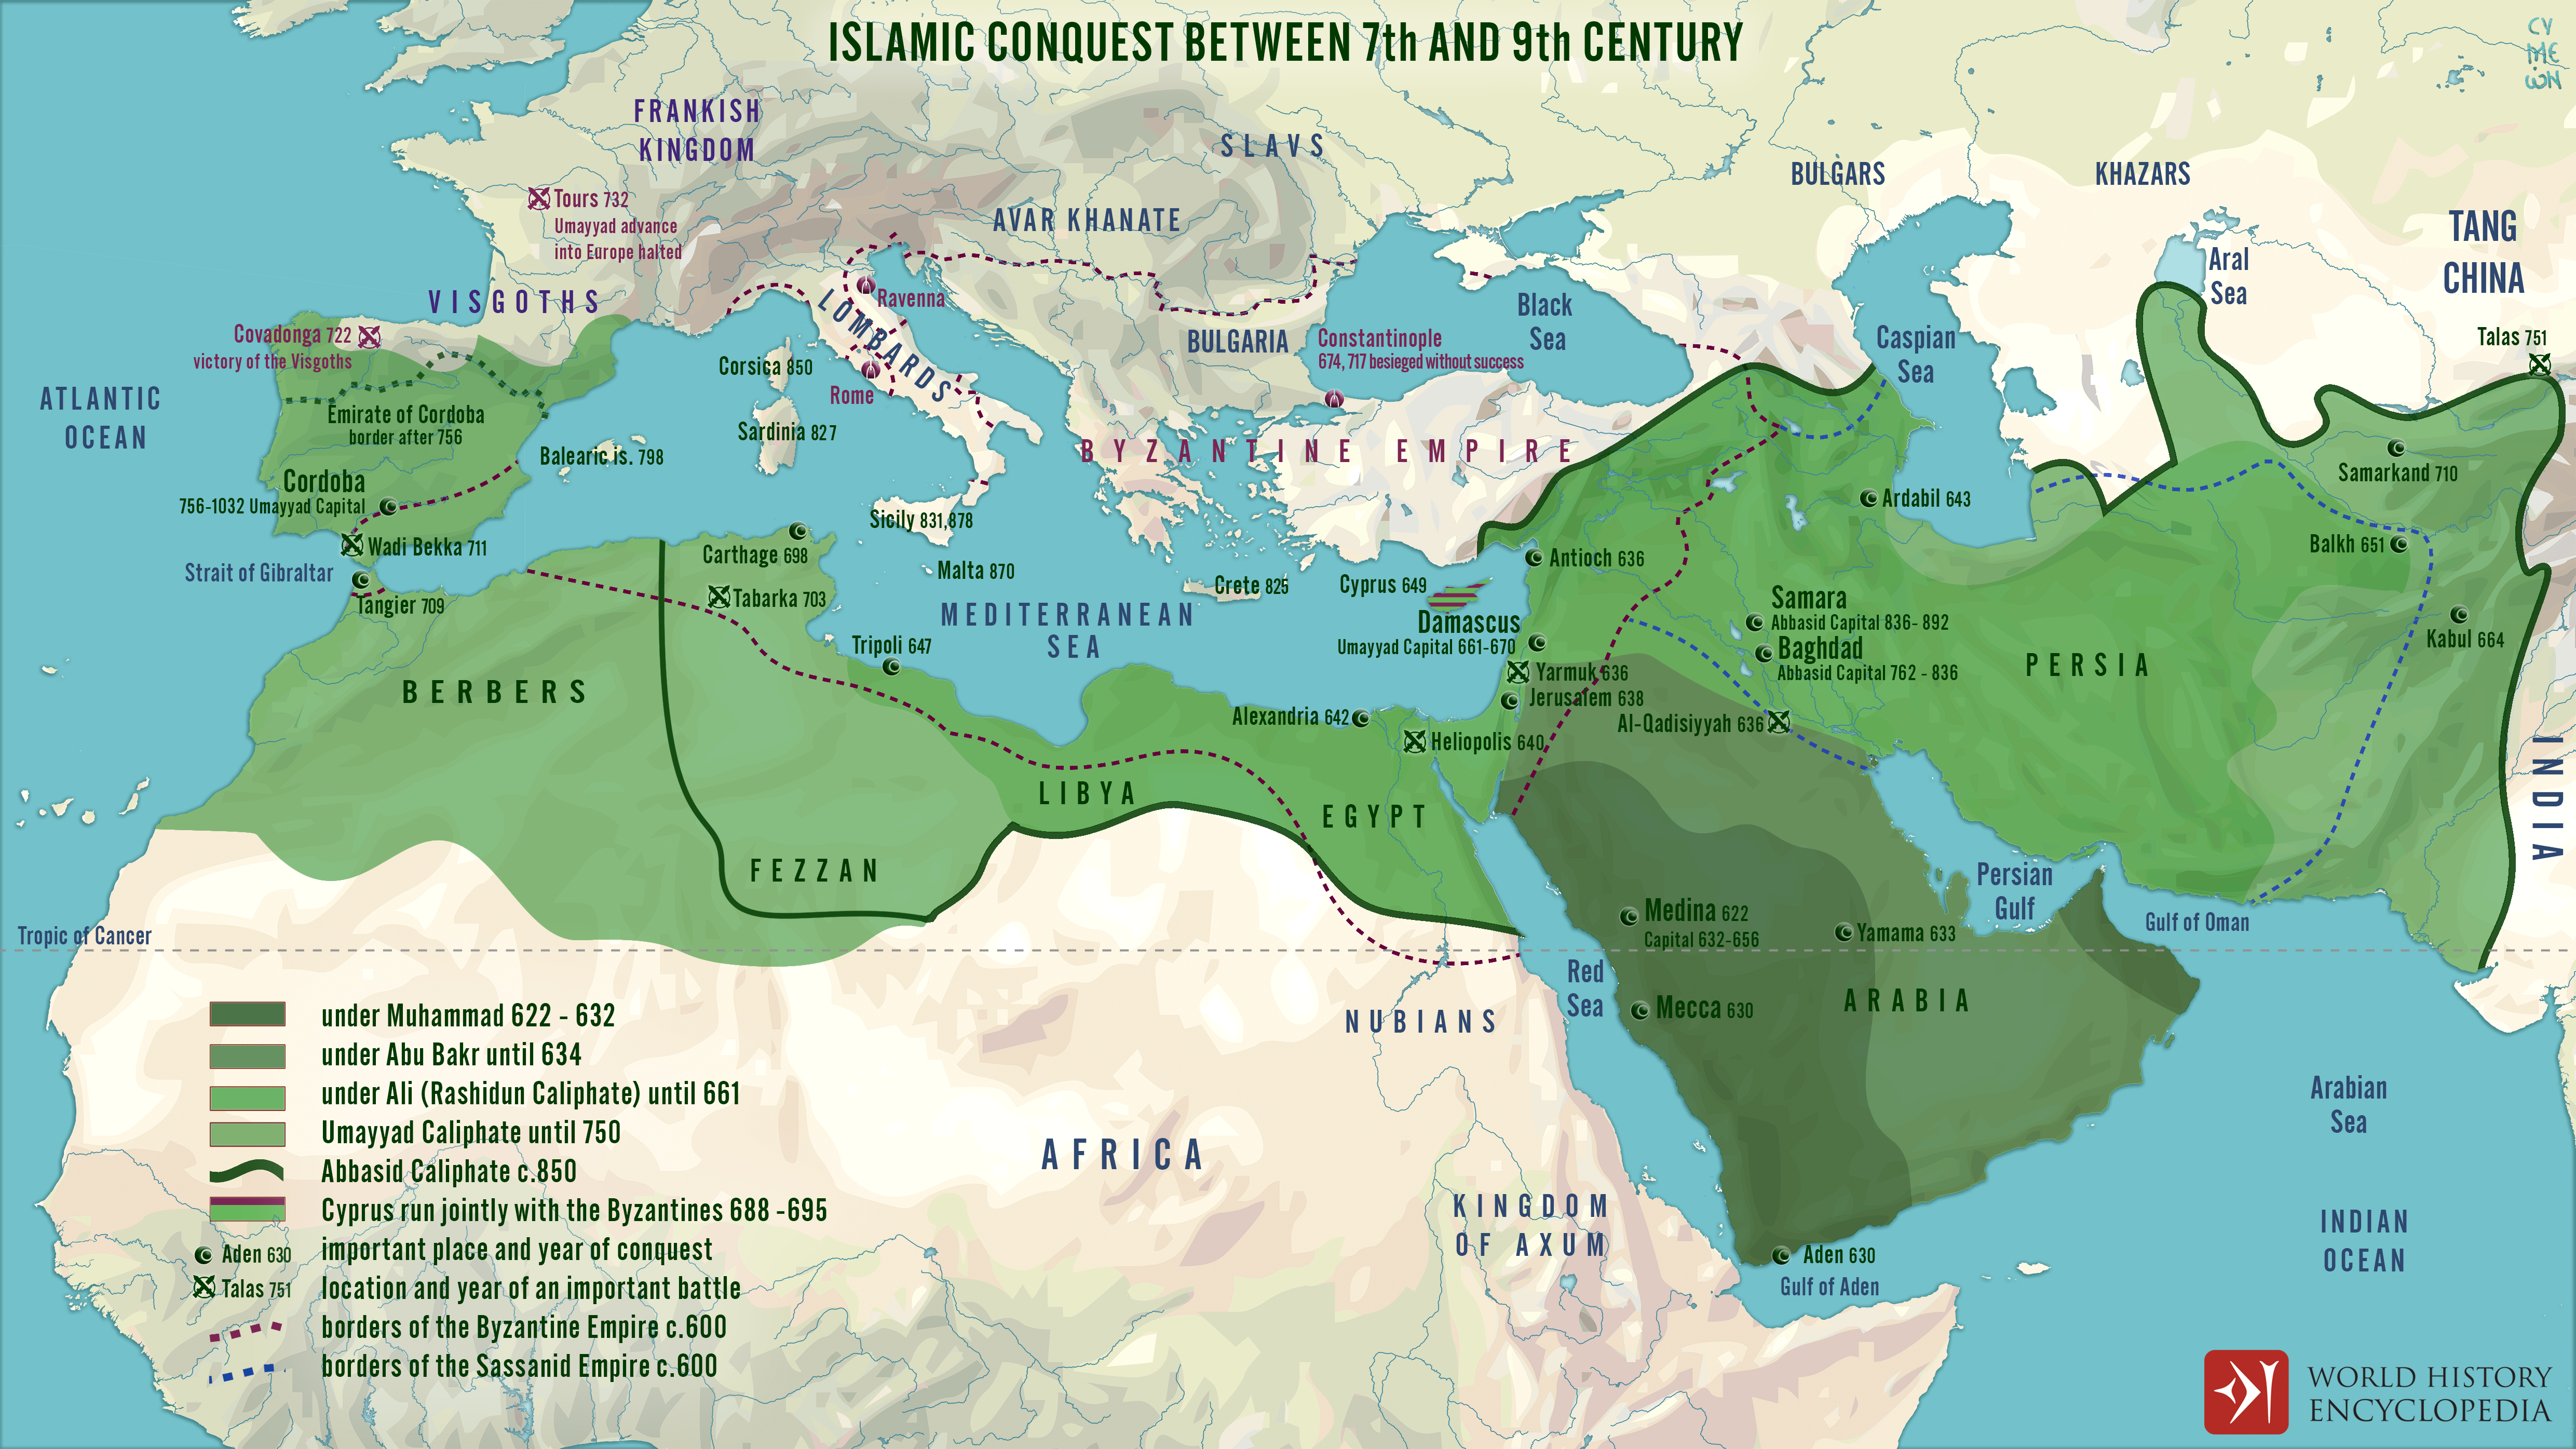 Islamic Conquests in the 7th-9th Centuries (Illustration) - World History  Encyclopedia